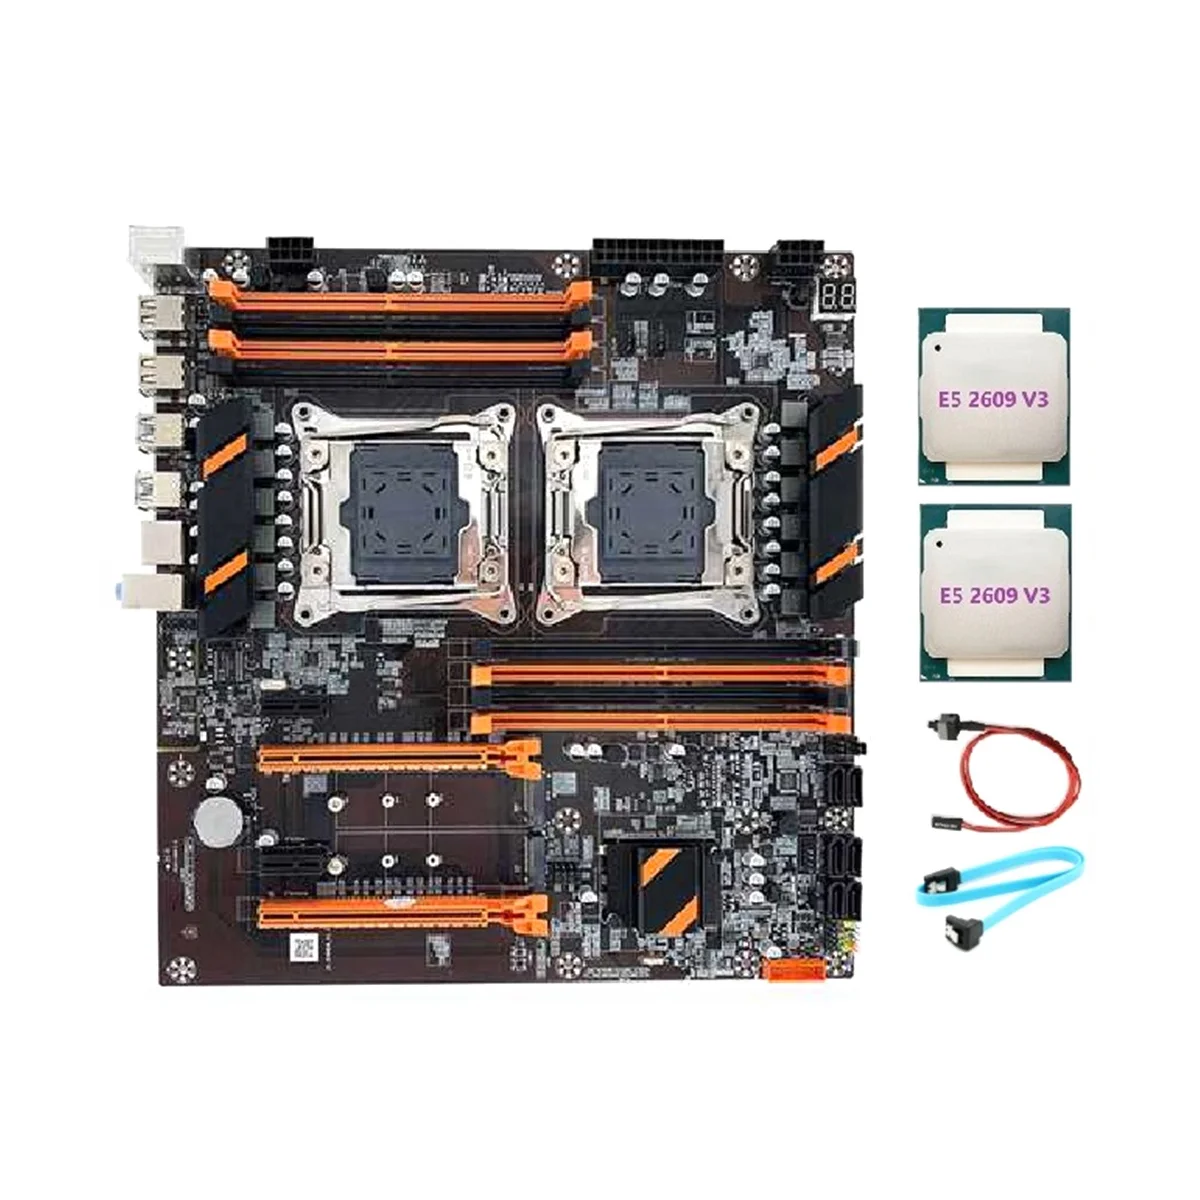 

X99 Dual CPU Motherboard LGA2011 Support DDR4 ECC Memory Motherboard+2XE5 2609 V3 CPU+SATA Cable+Switch Cable